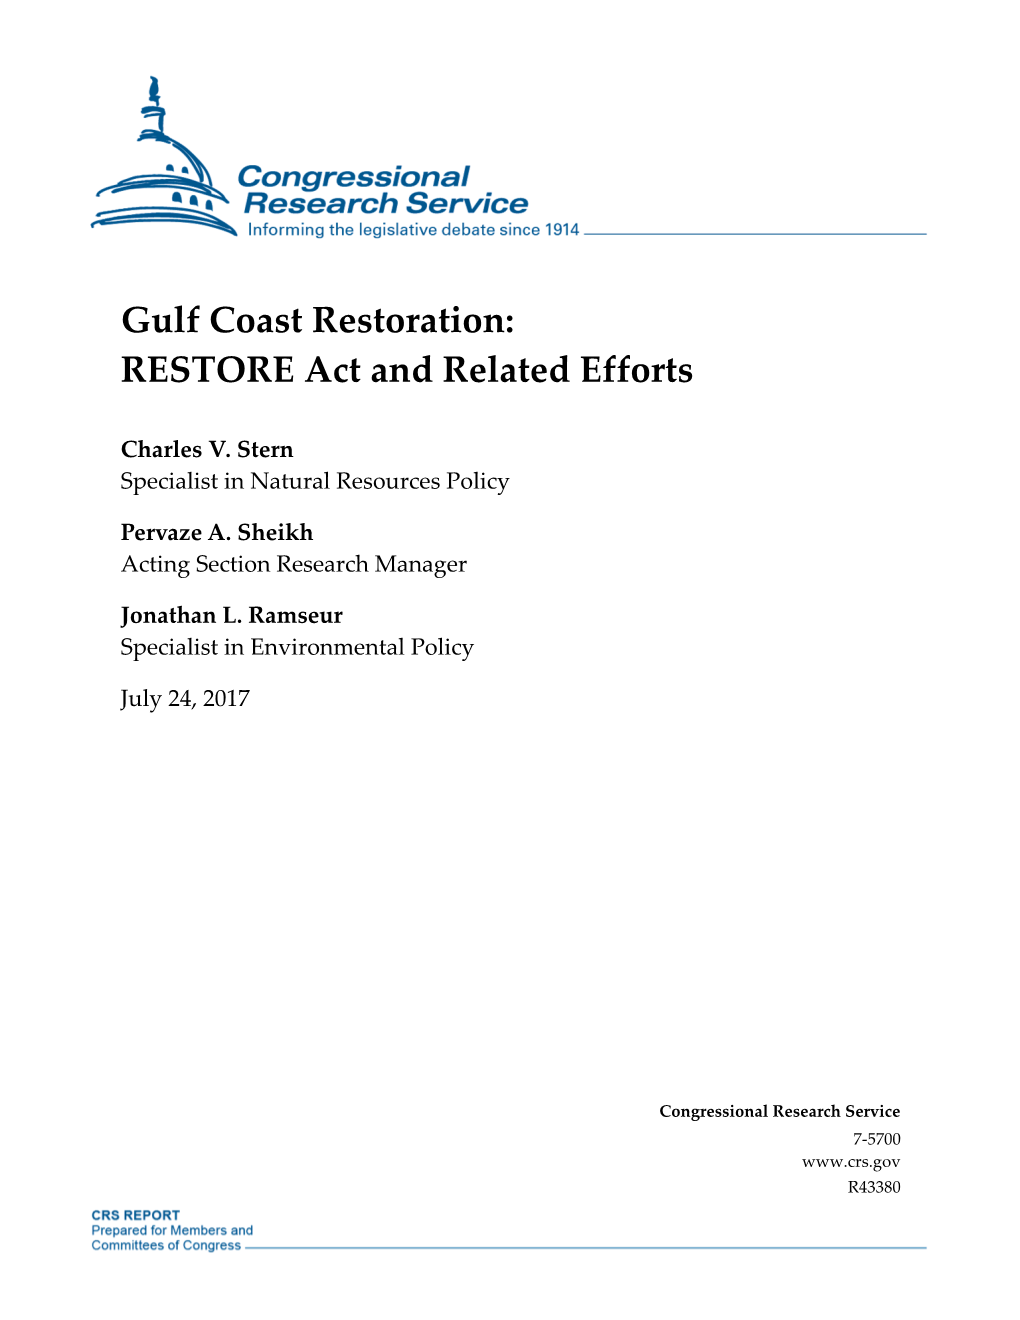 Gulf Coast Restoration: RESTORE Act and Related Efforts